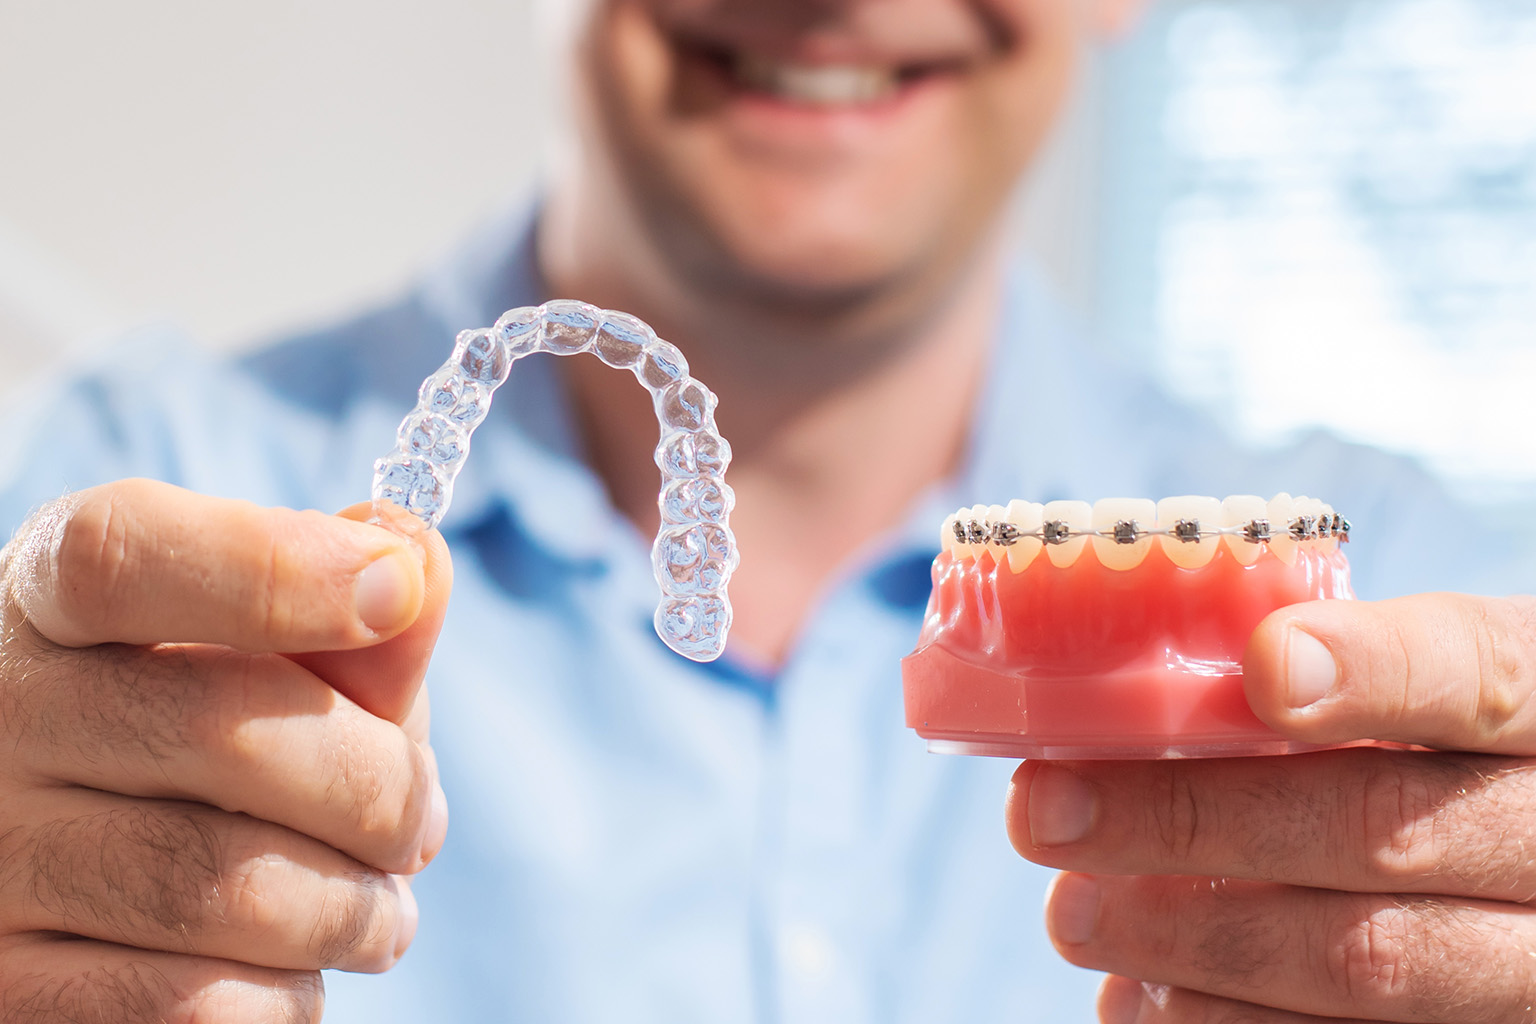 man holding clear aligners in one hand and a model of teeth with braces in the other